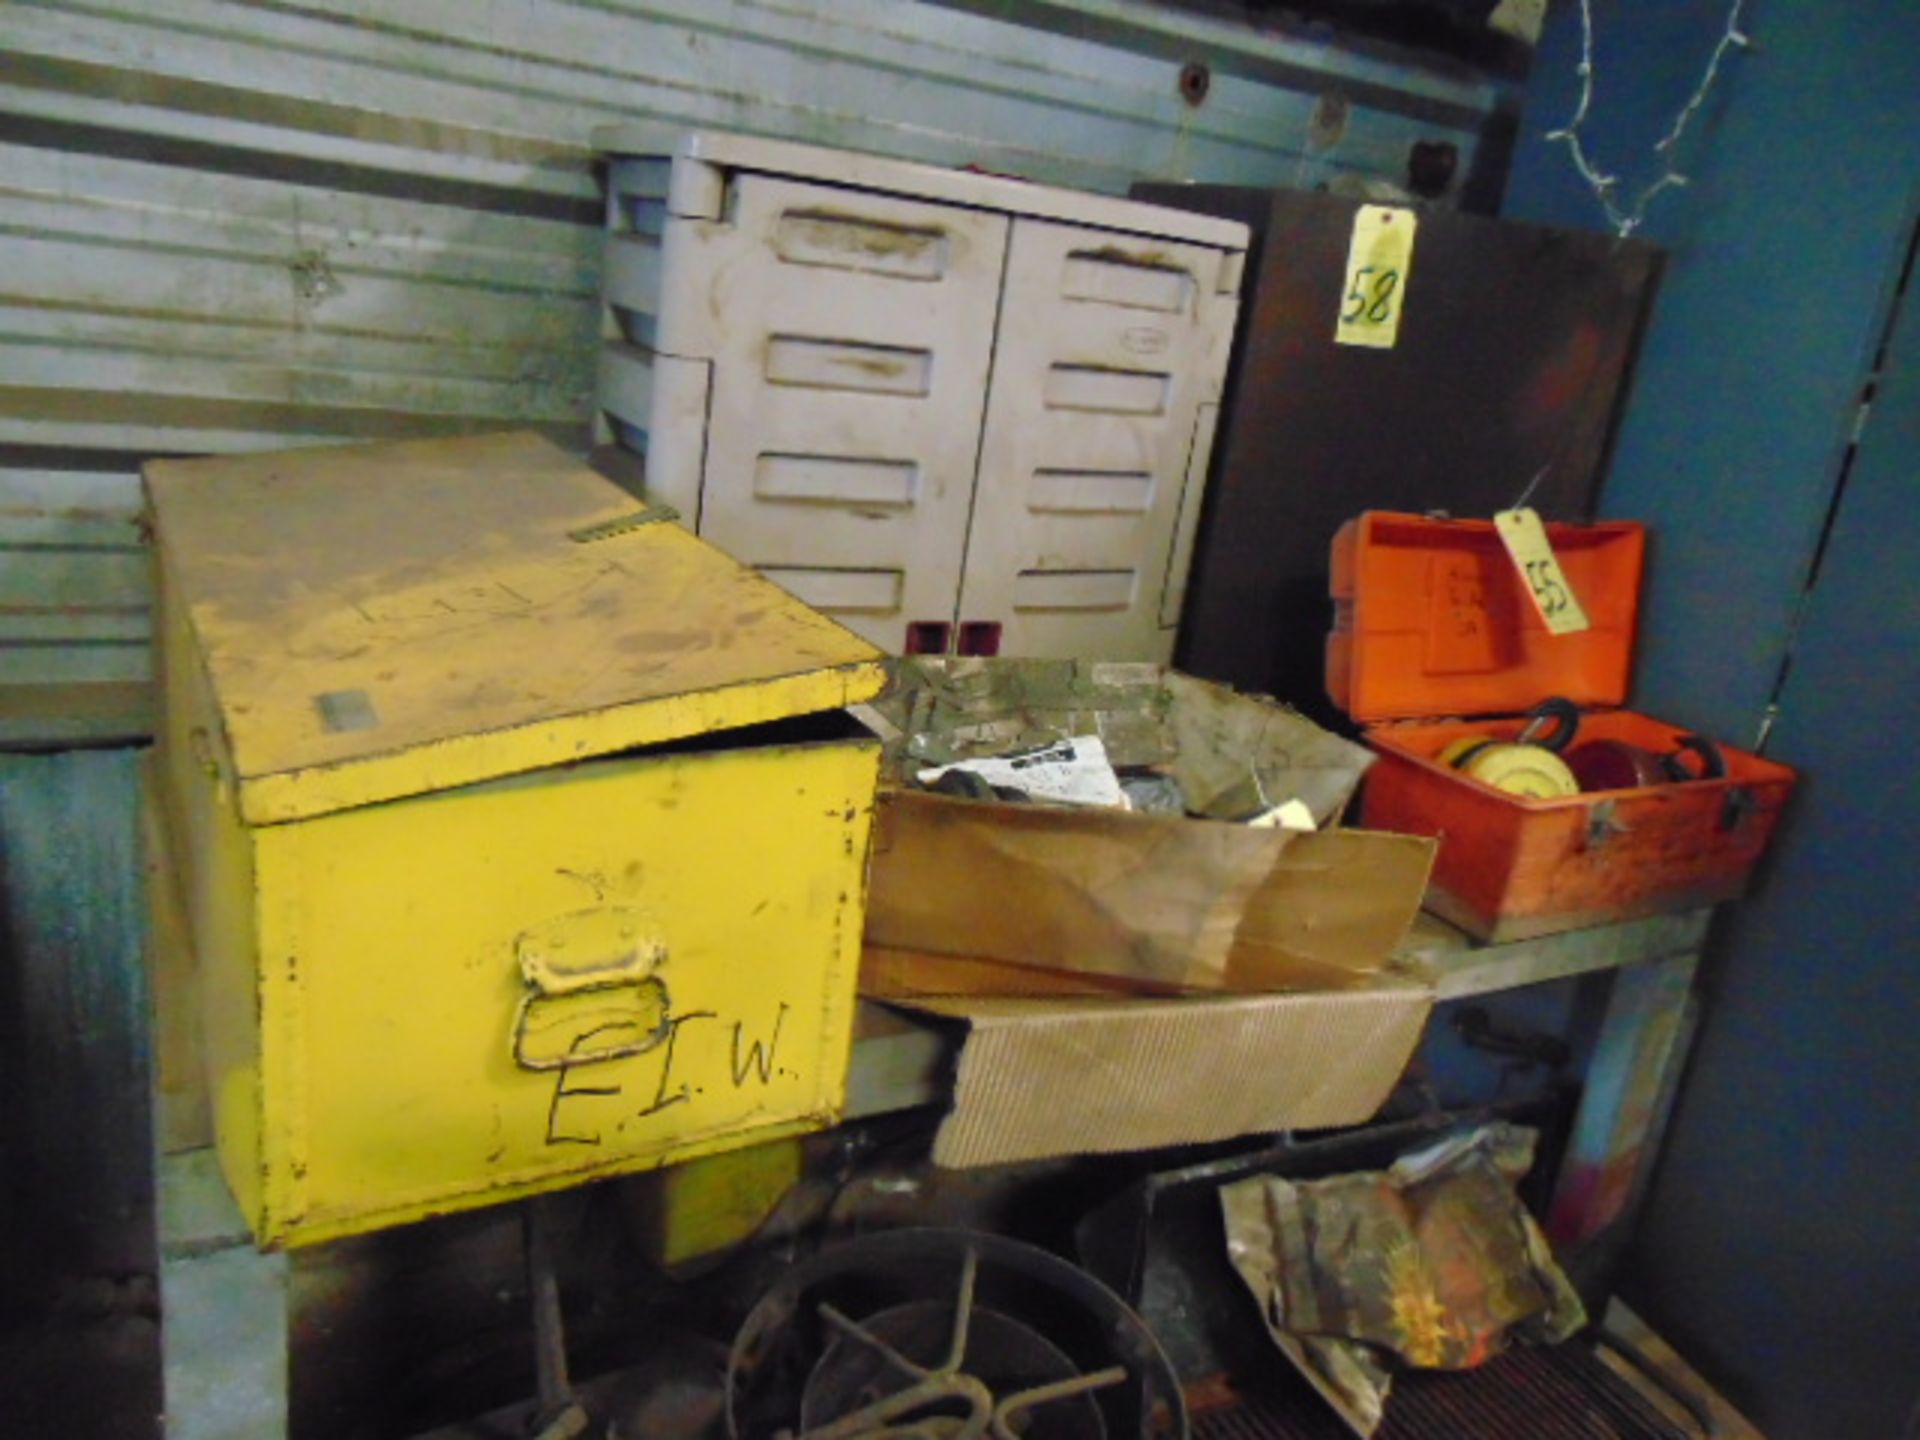 LOT CONSISTING OF: (2) cabinets, toolbox & worktable (cannot be removed until contents have been